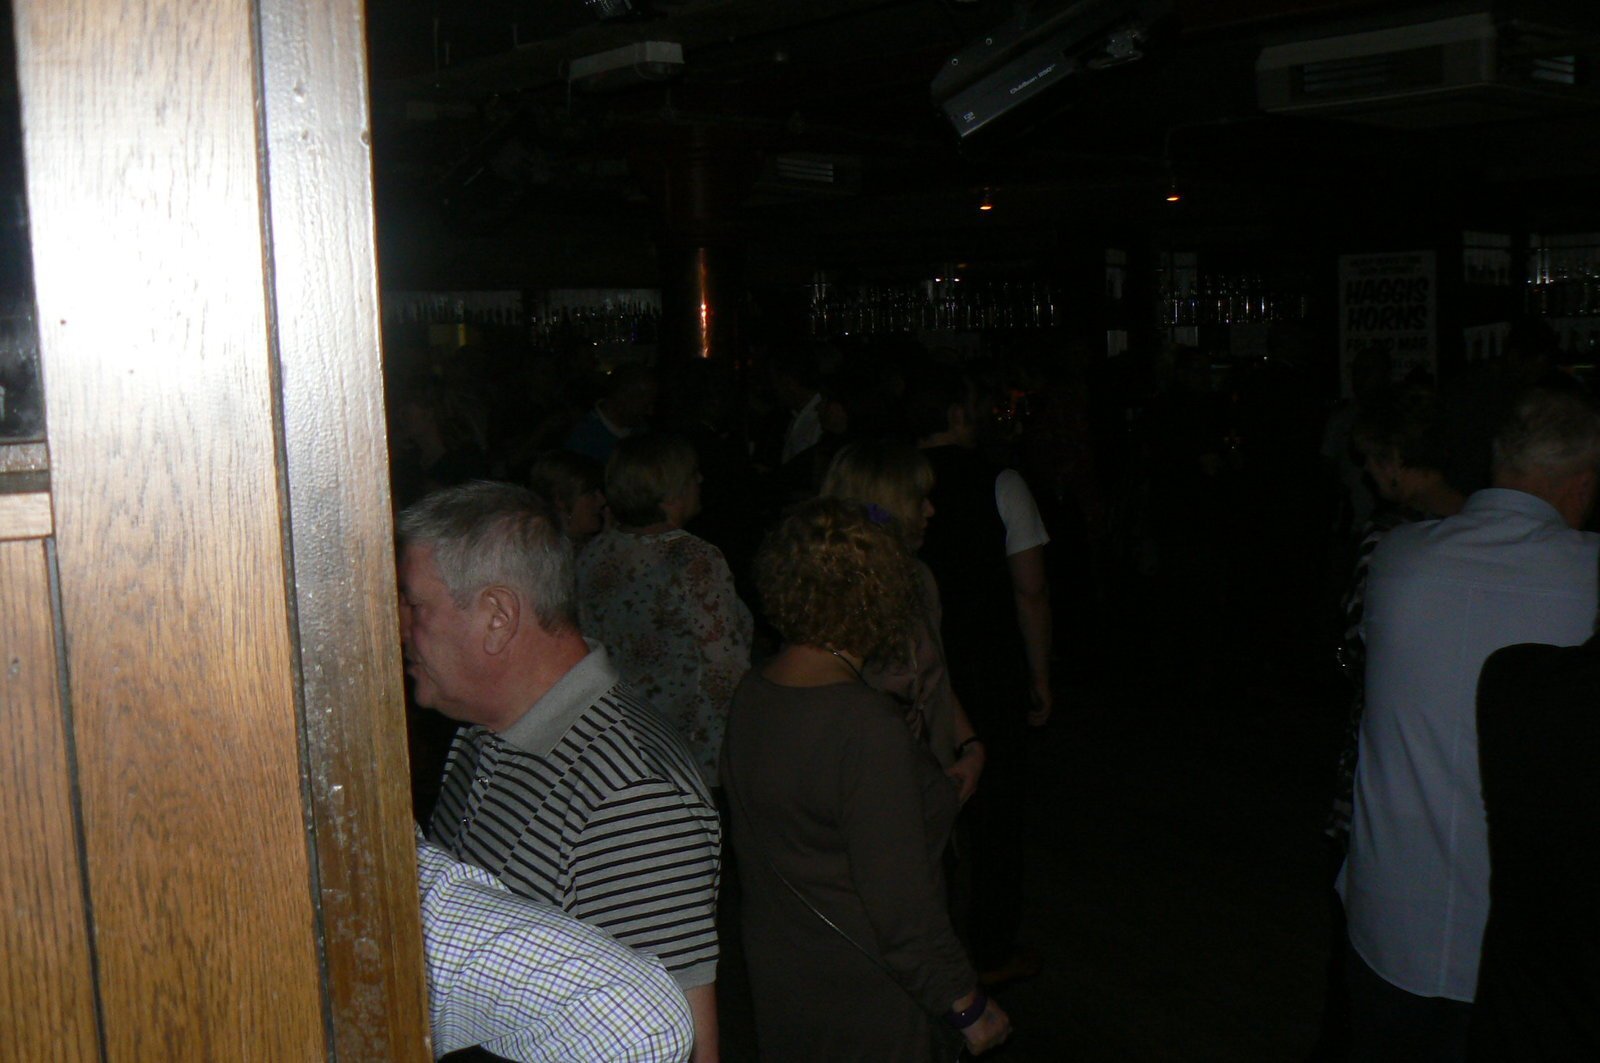 Leeds central Soul Club All dayer - 19/2/2012